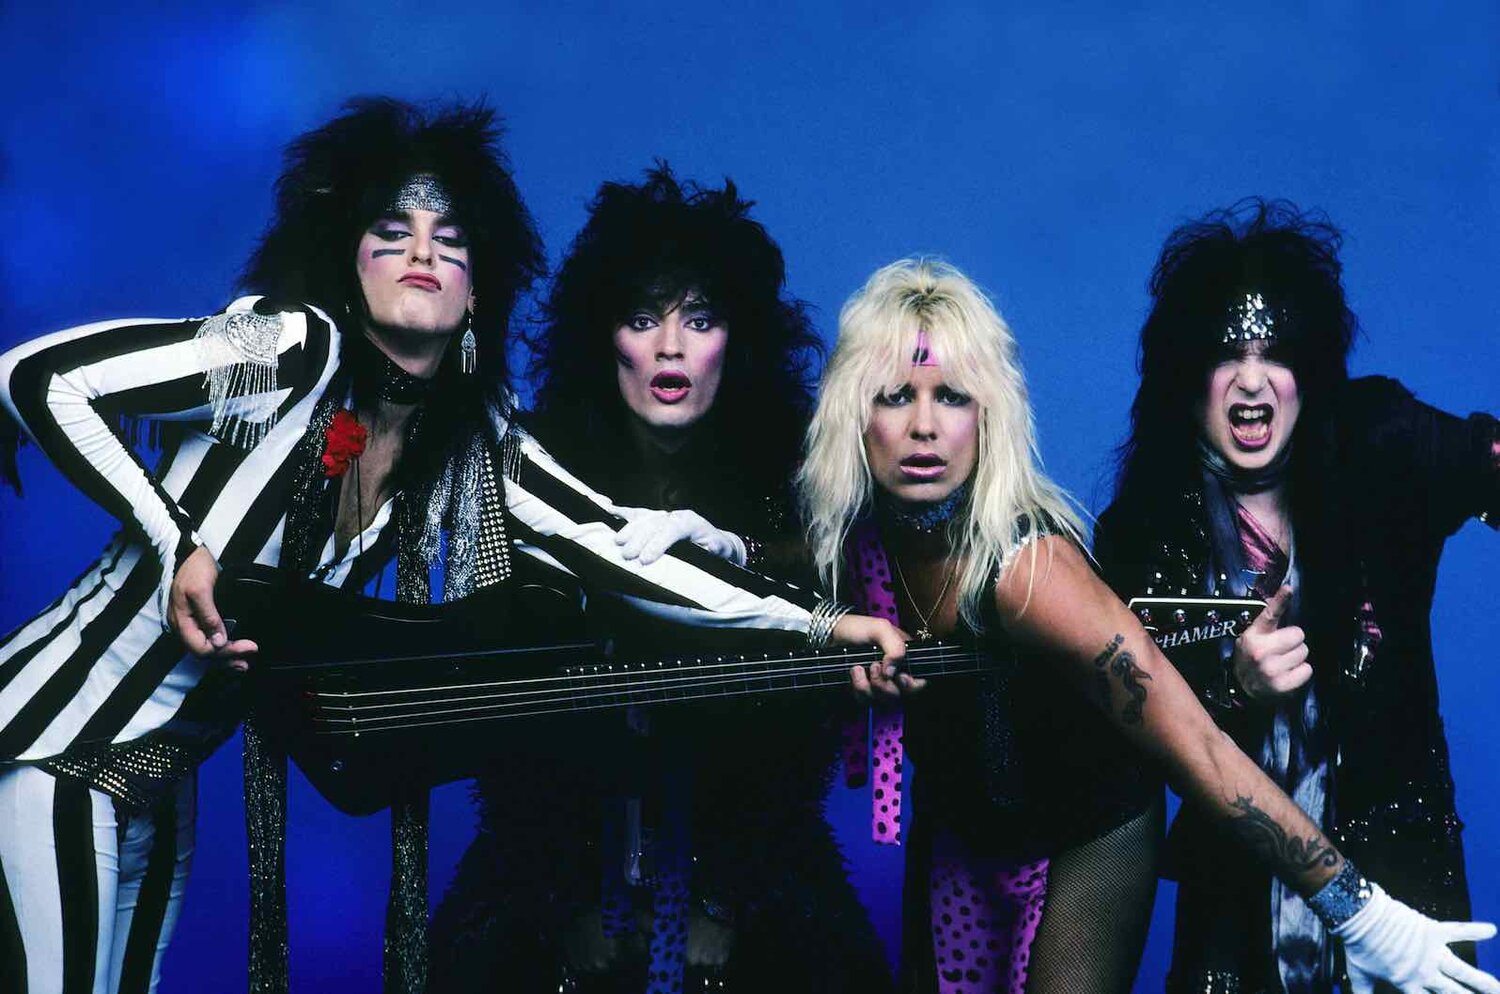 About Mötley Crüe - “The Most Notorious Rock Band Of All Time” 